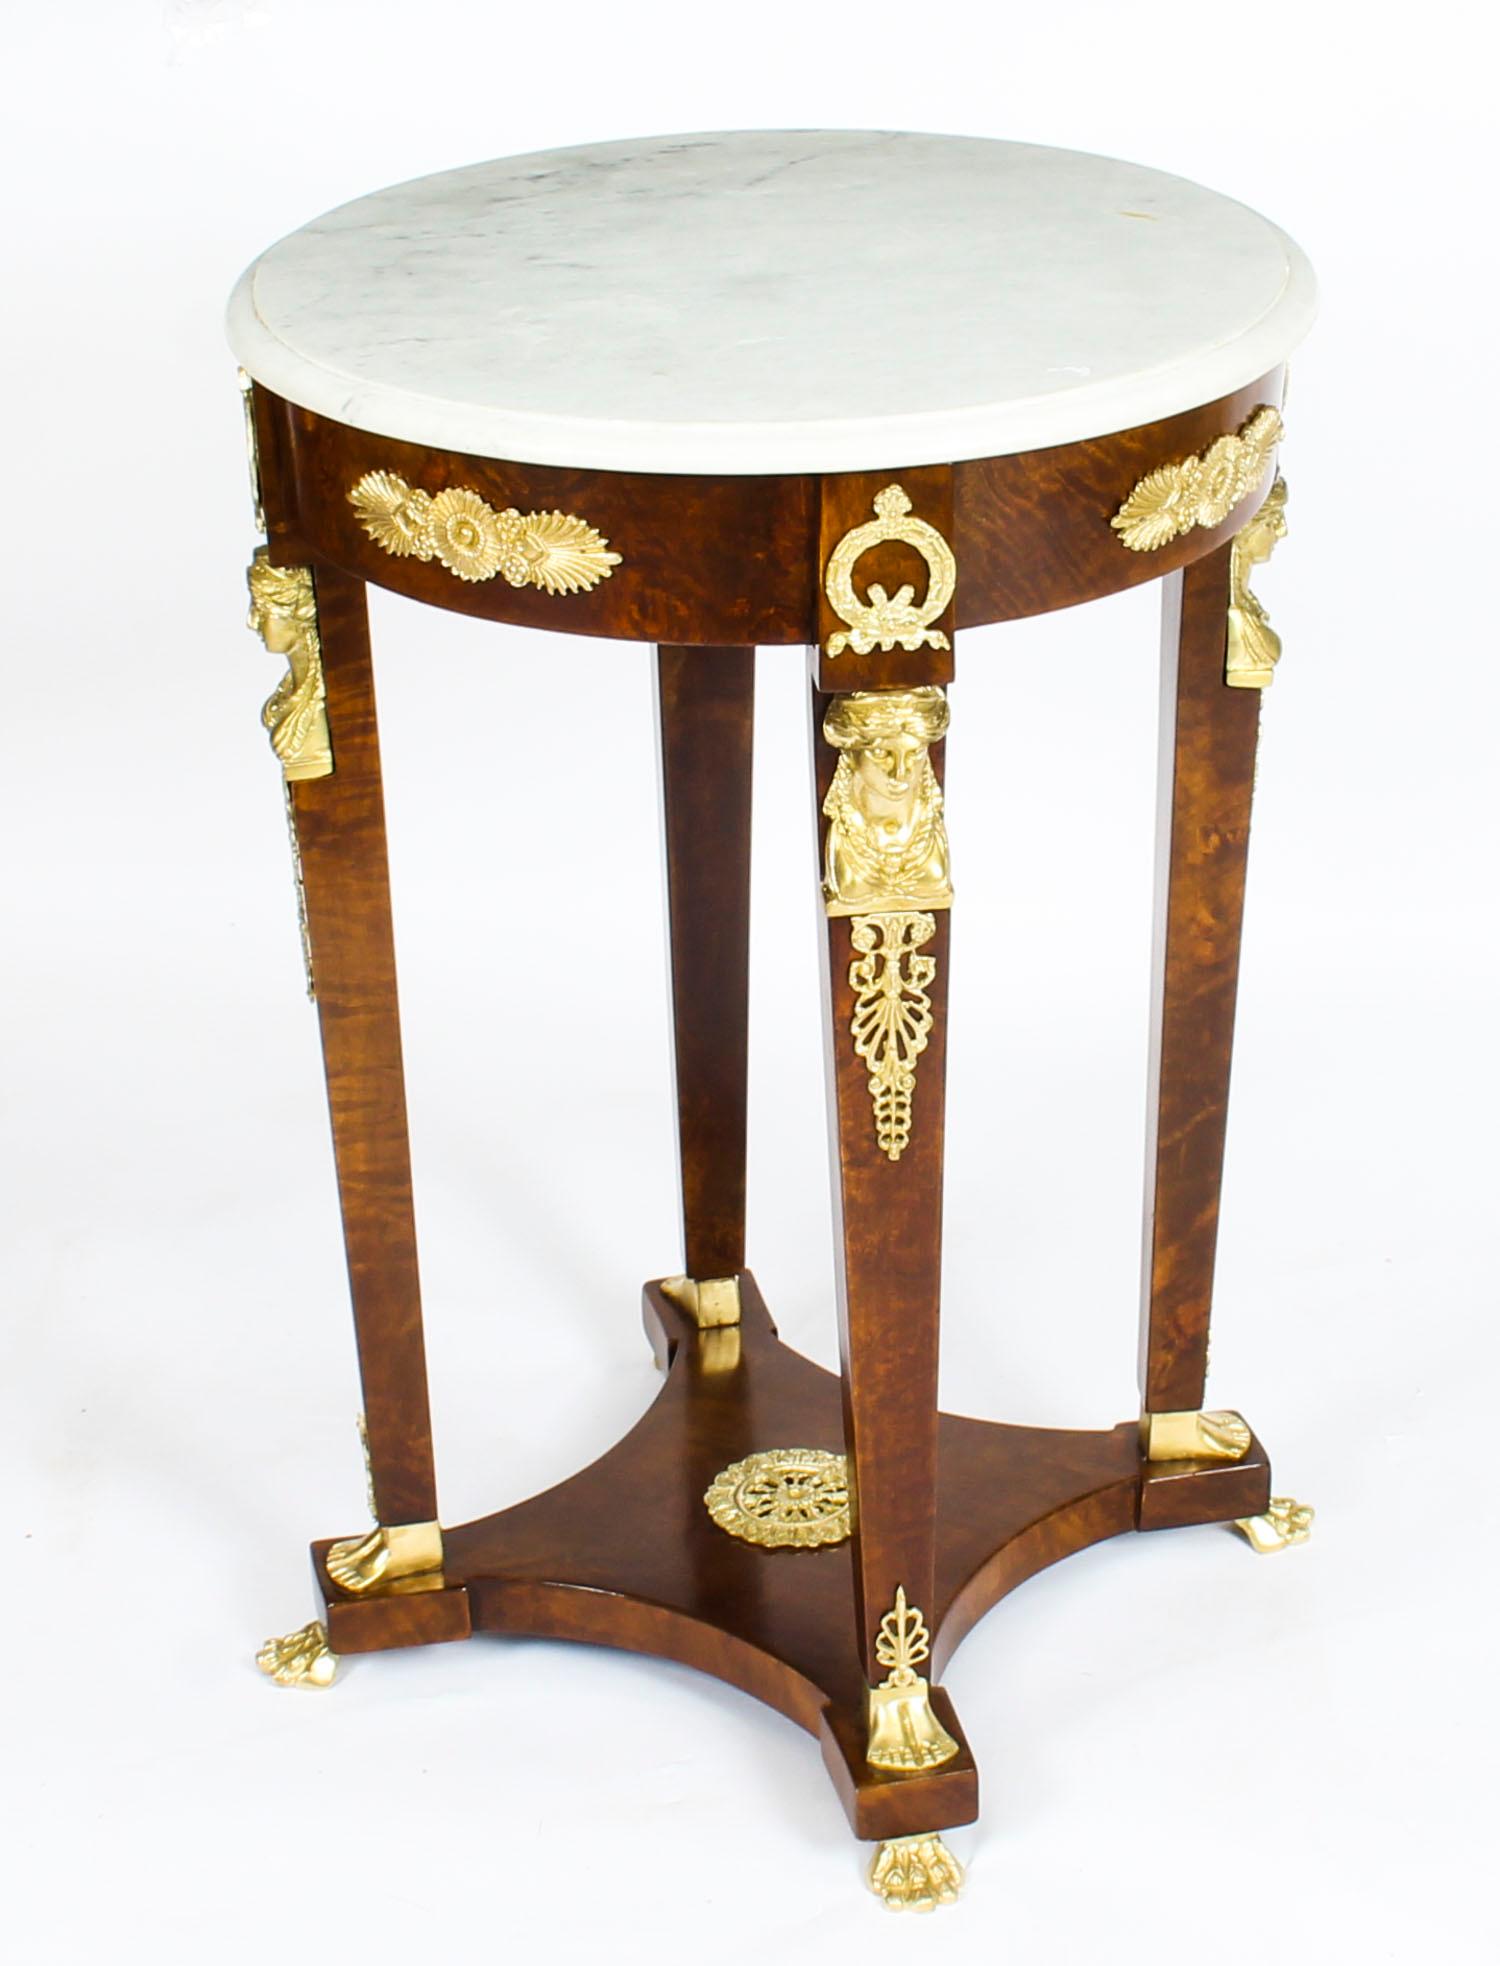 This is a beautiful antique late 19th century French Empire Revival circular marble top guéridon decorated with ormolu mounts.

The white and grey circular marble top above square form tapering legs with ormolu caryatid mounts. The quadripartite